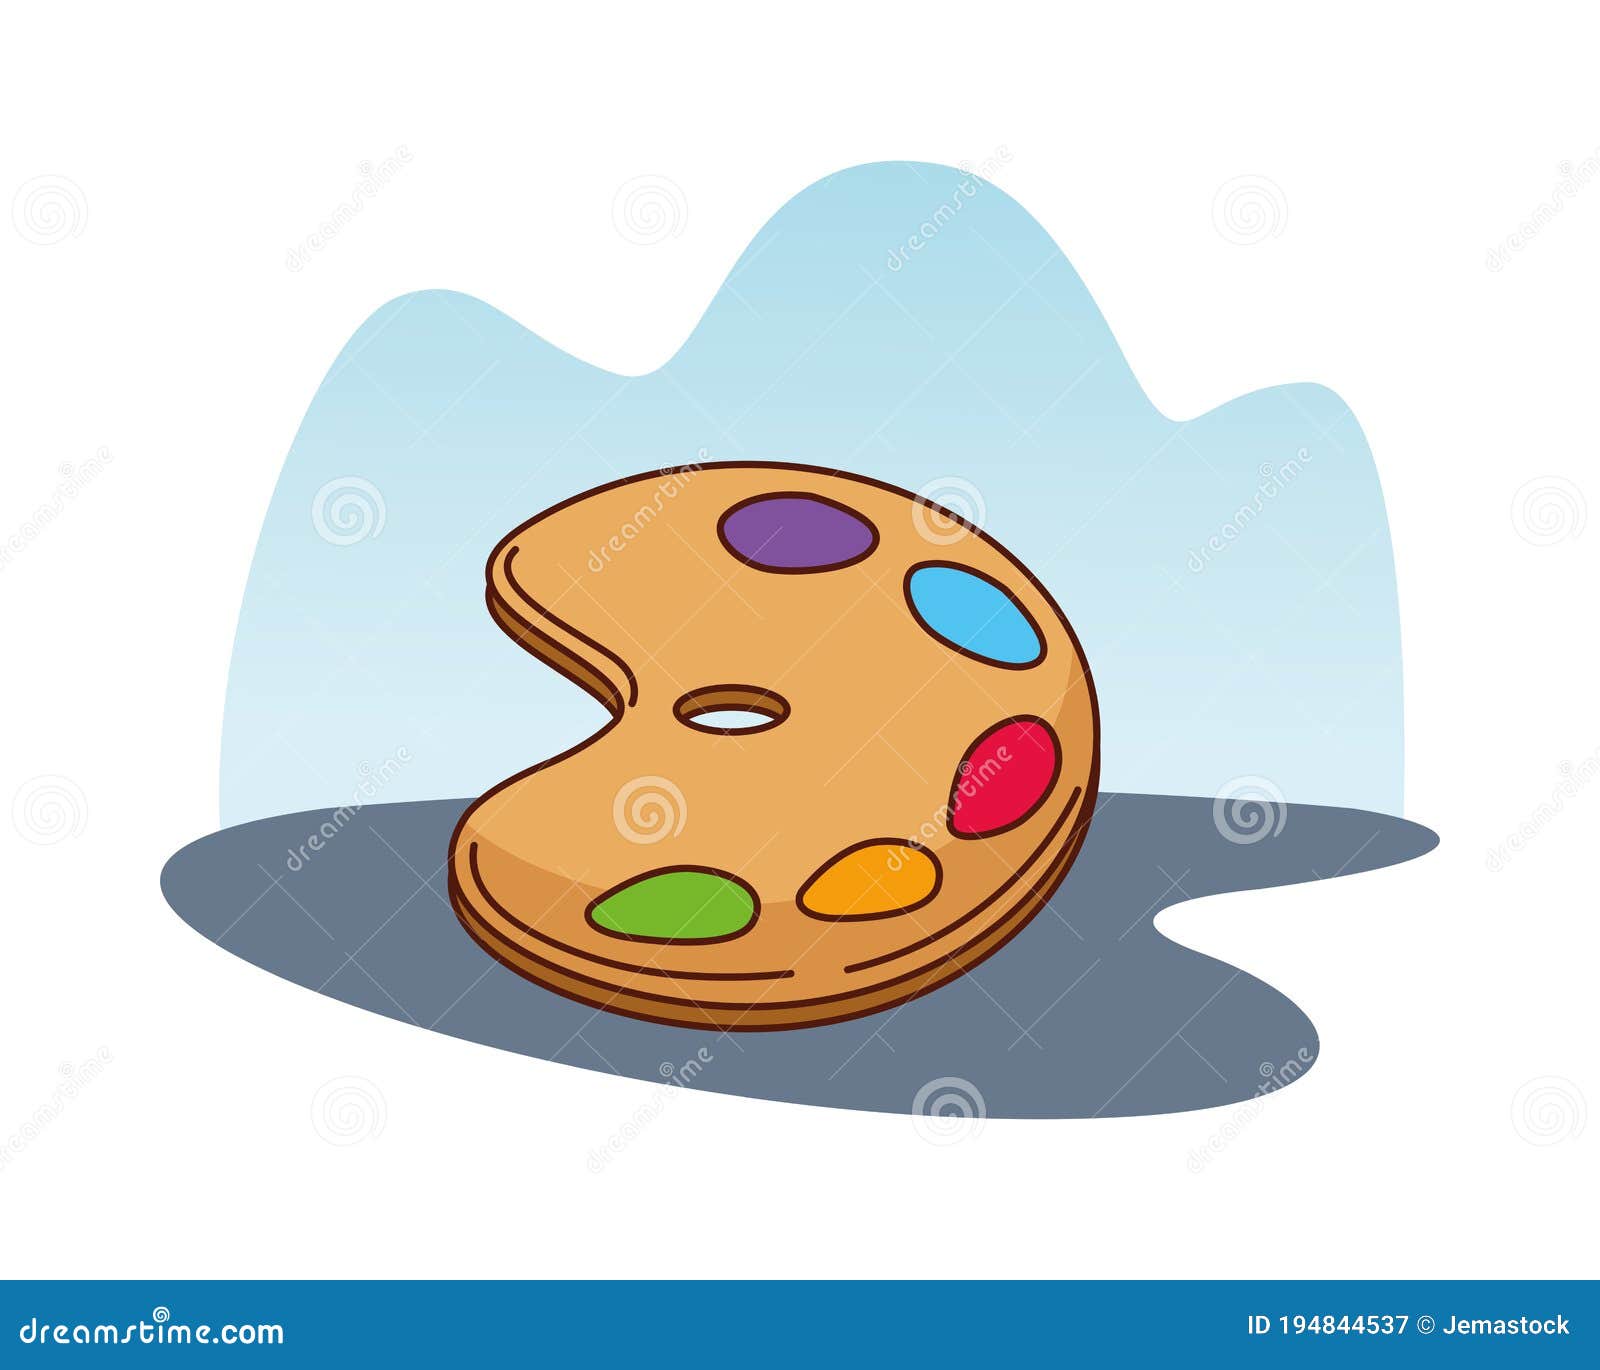 Palette Art Painting, painting, food, painting, palette png